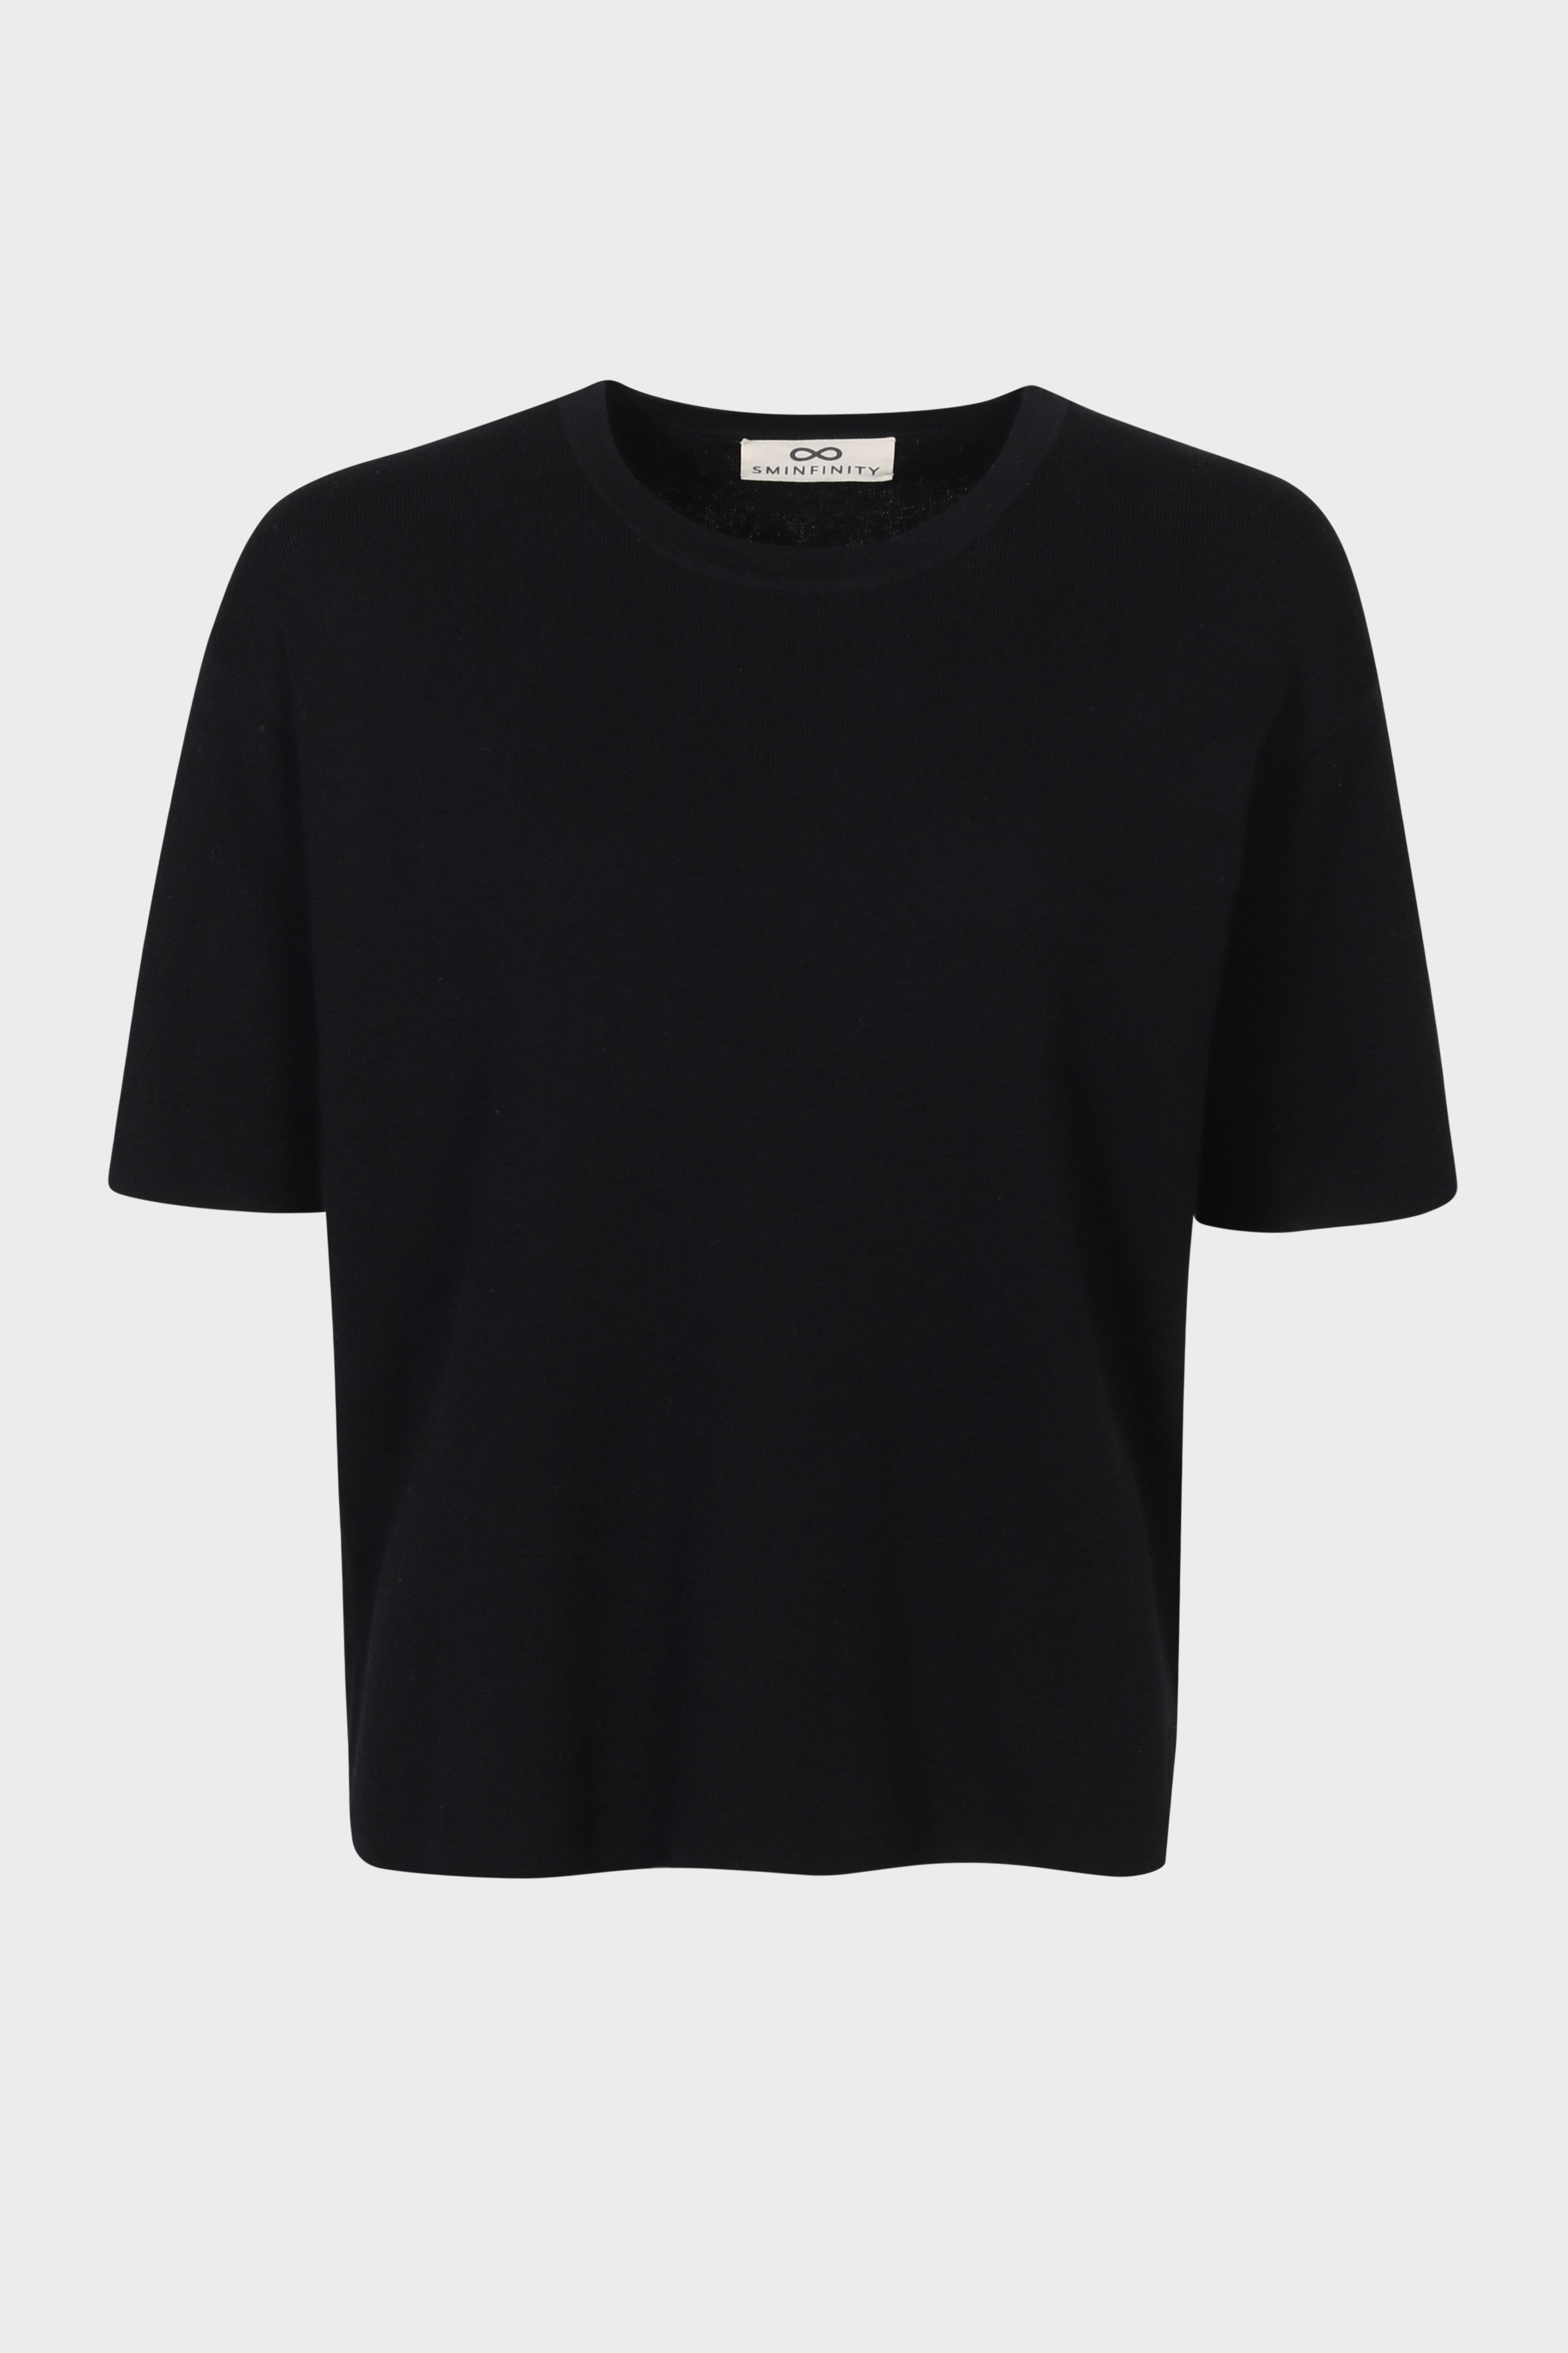 SMINFINITY Comfy Knit T-Shirt in Black